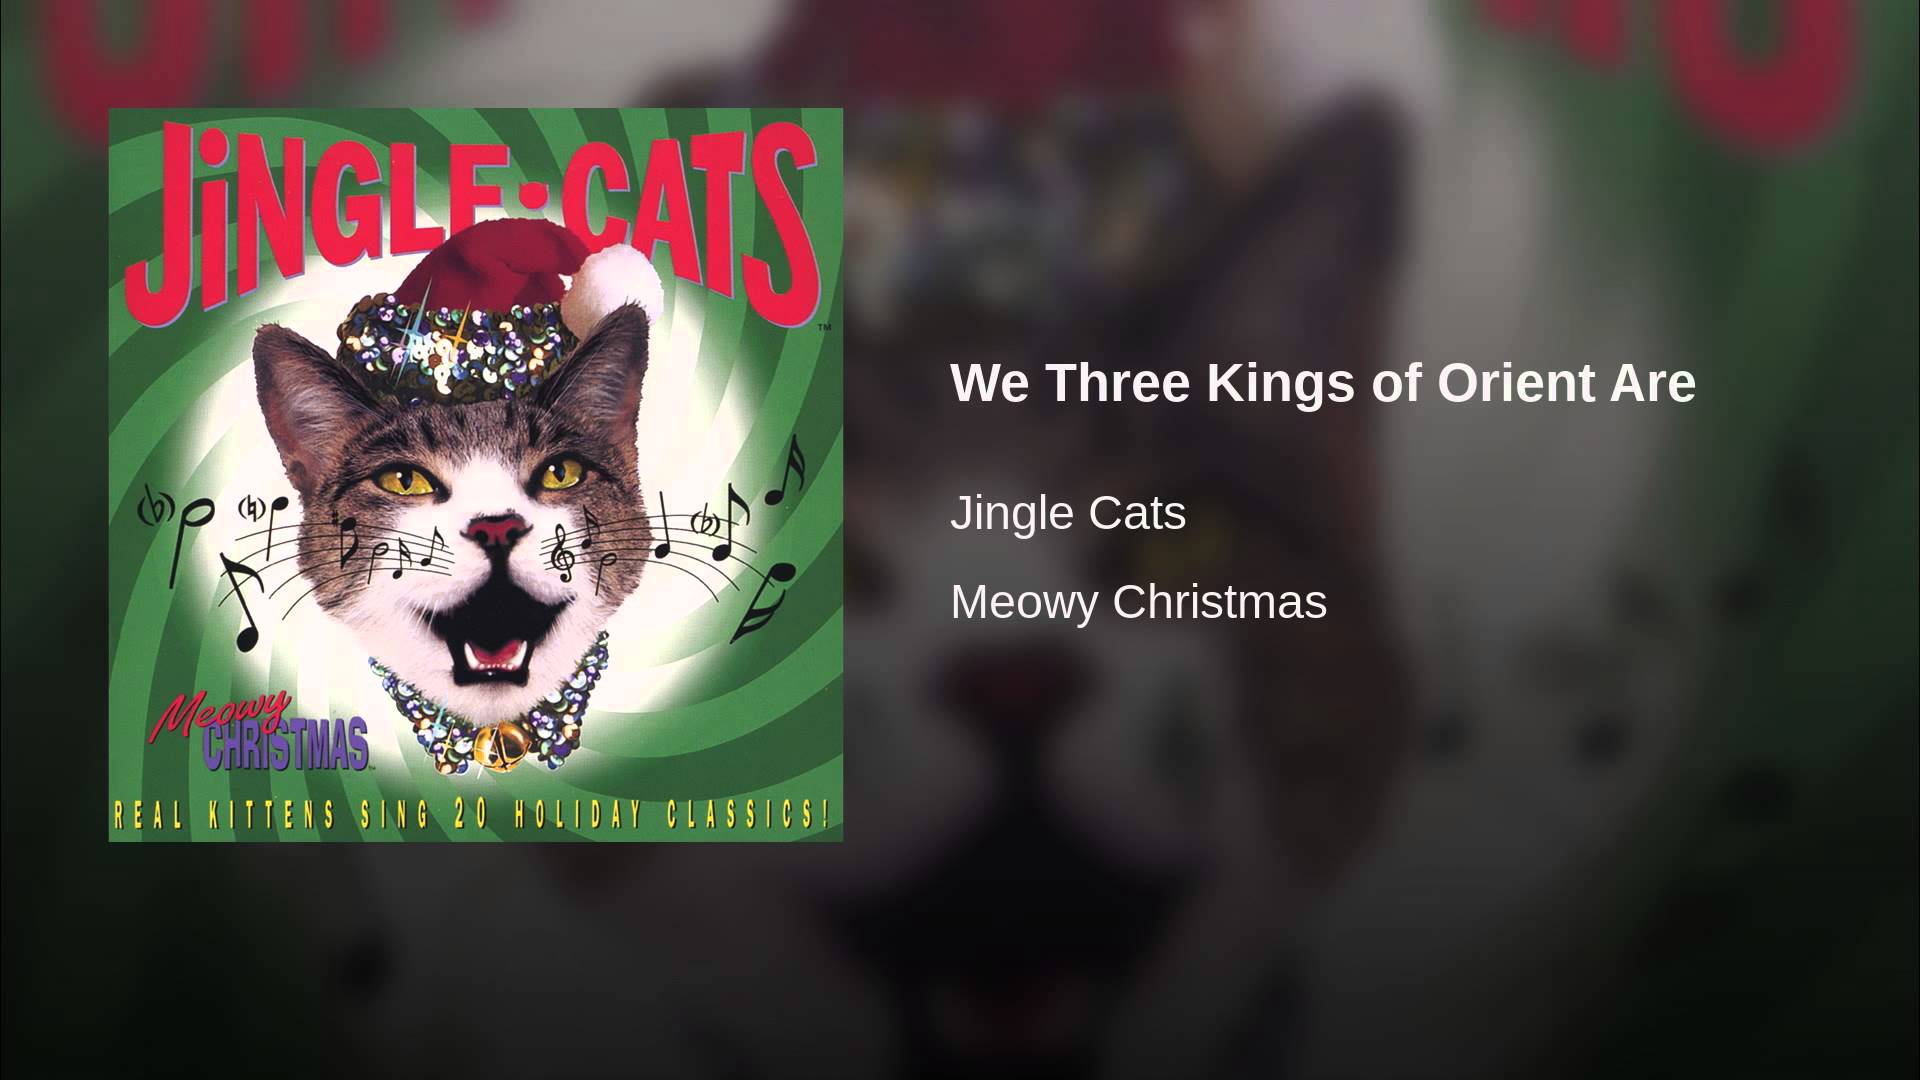 We Three Kings of Orient Are - YouTube